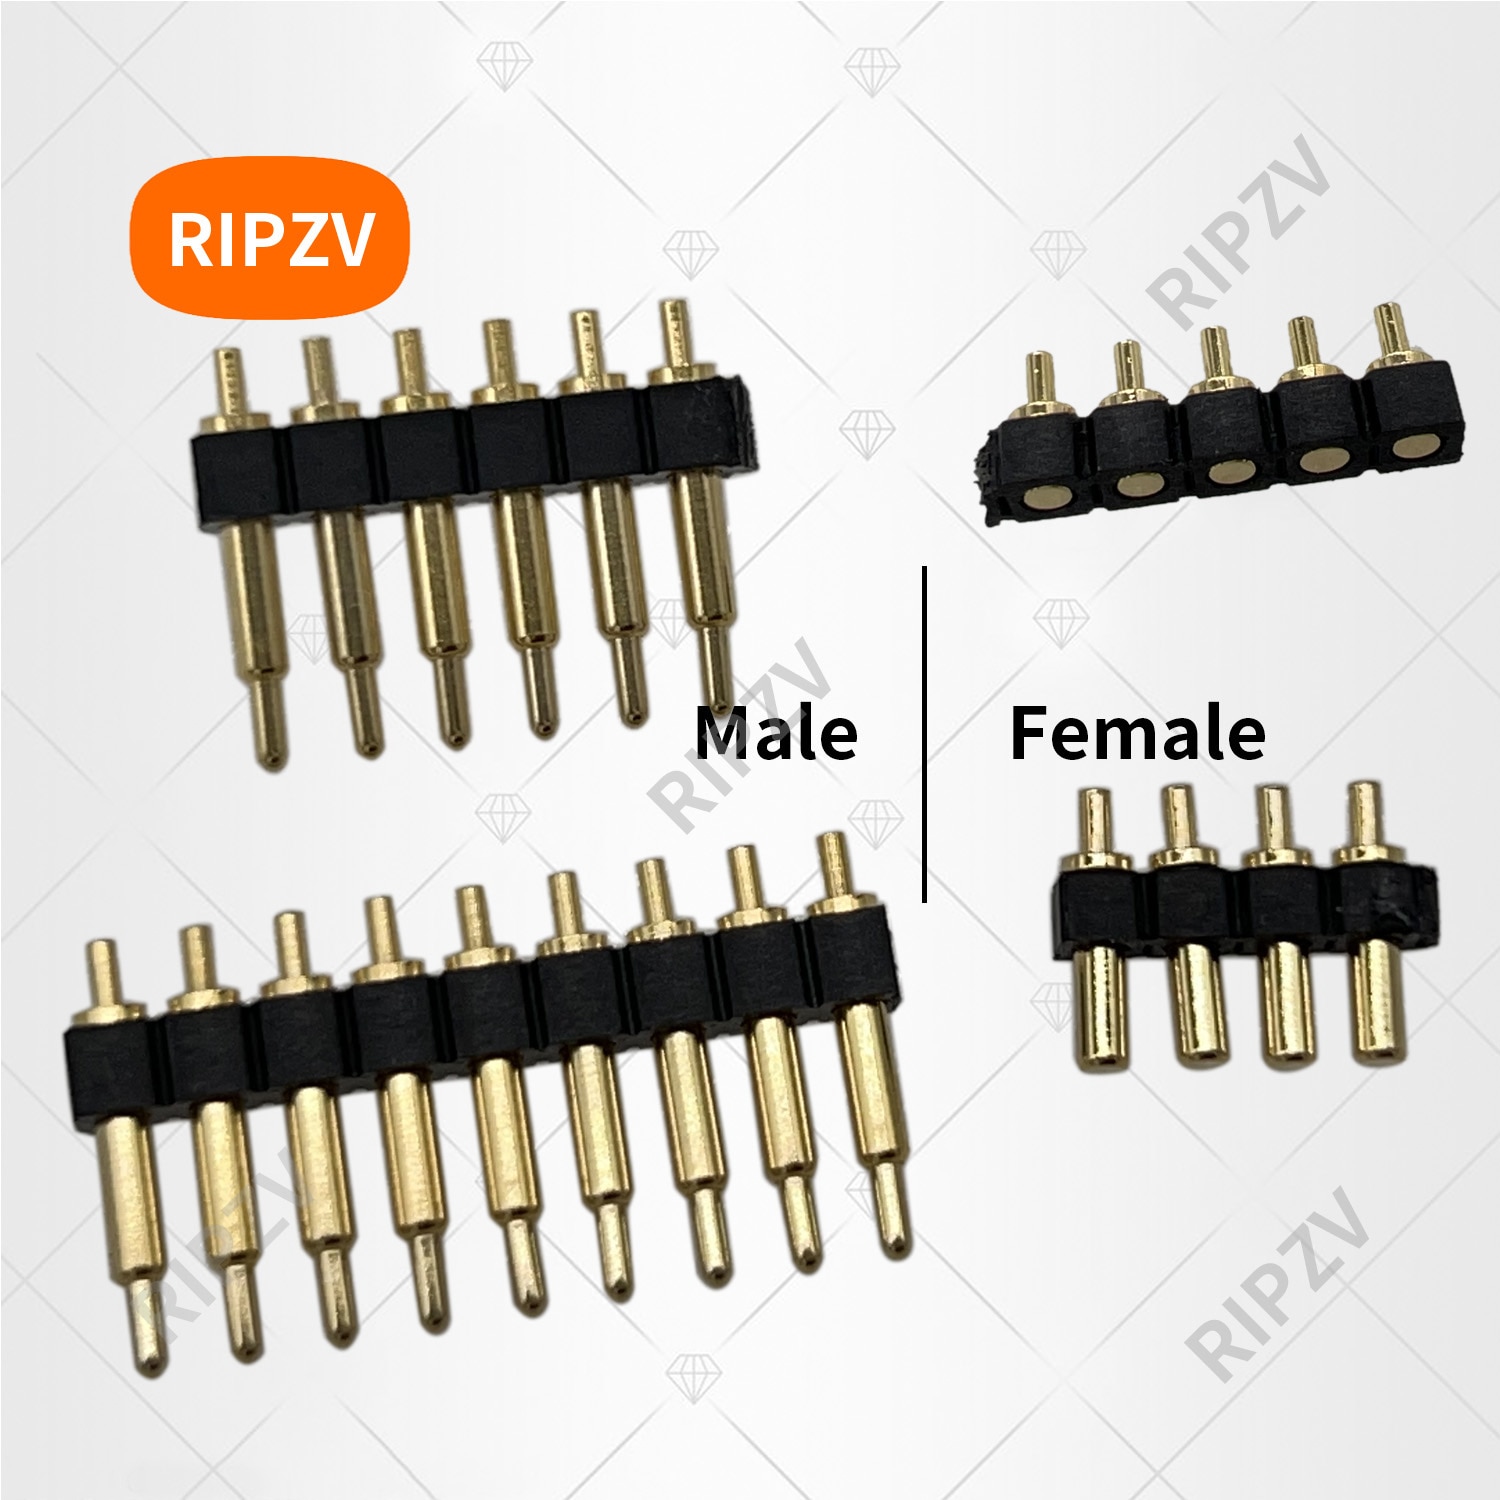 1pcs Male / Female Spring Loaded Pogo pin header Target Connector 2.54mm Pitch 2p 3p 4p 5p 6p 7p 10p  Positions Through Hole PCB